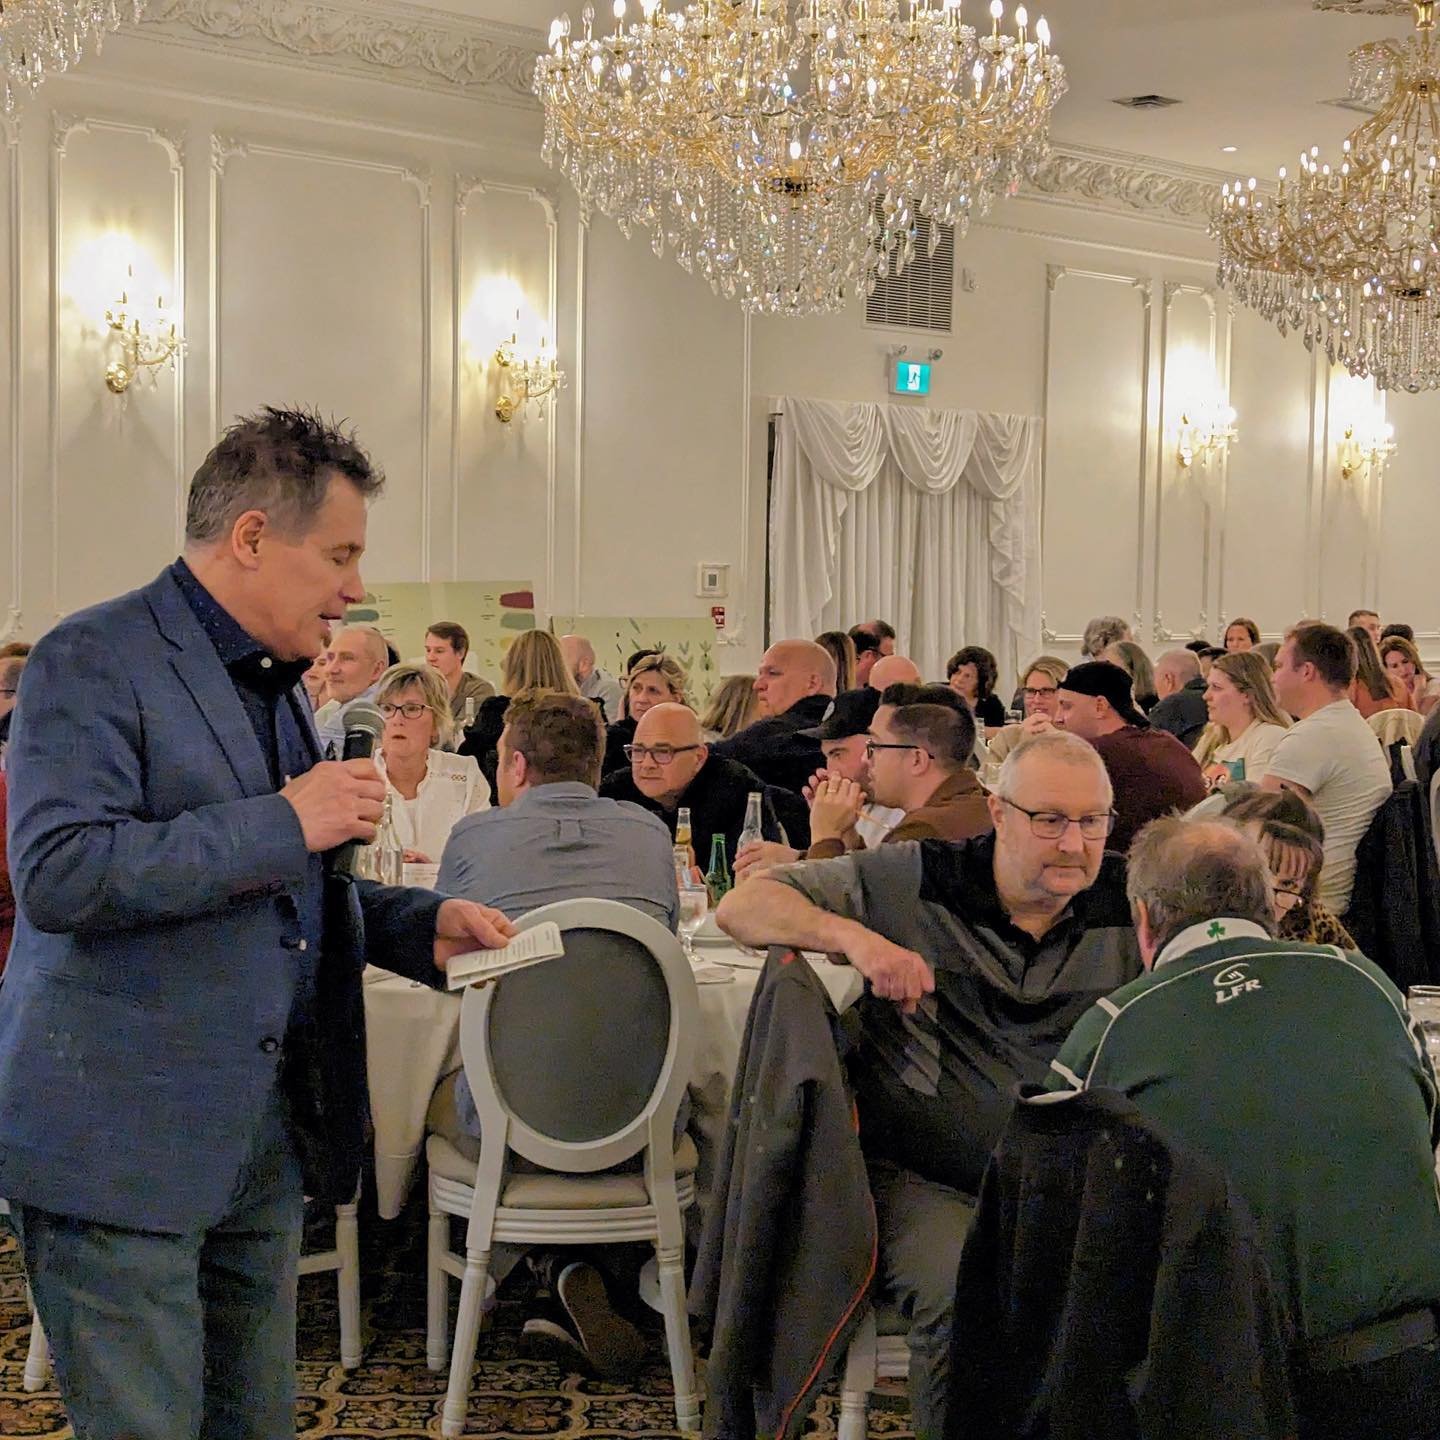 Last Friday, over 120 people packed Rodman Hall in support of The Brown Homestead!

Thank you to all who made our first-ever fundraising event a night to remember! From trivia team banter to admiring Rodman Hall&rsquo;s restoration work, the mouth-wa